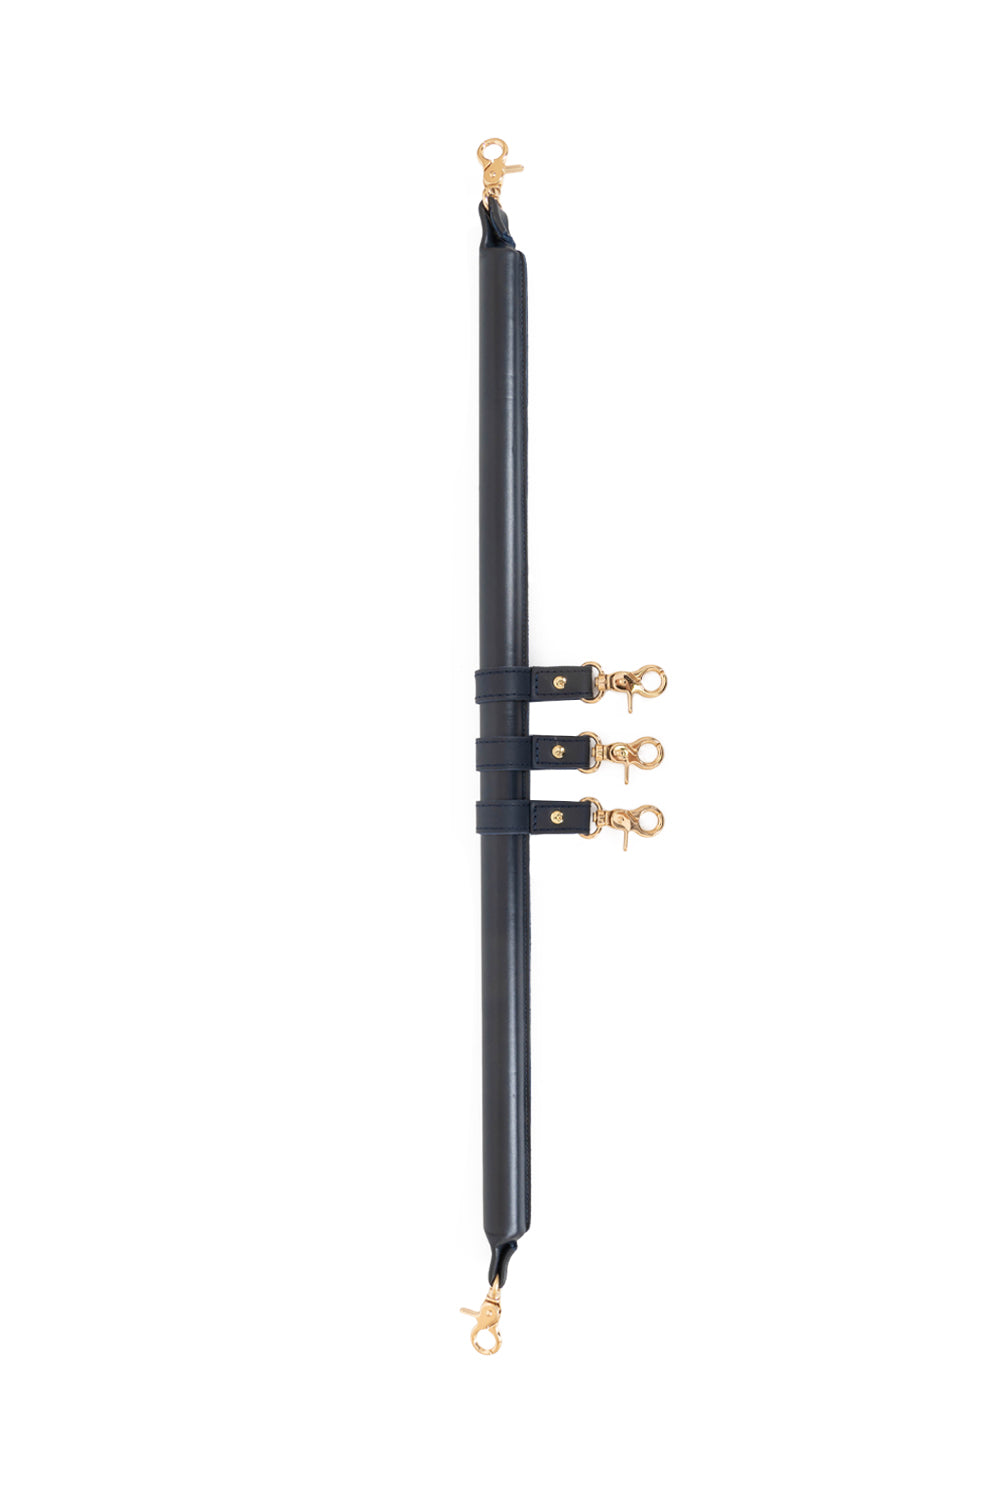 5 point BDSM Leather Spreader Bar with cuff hooks